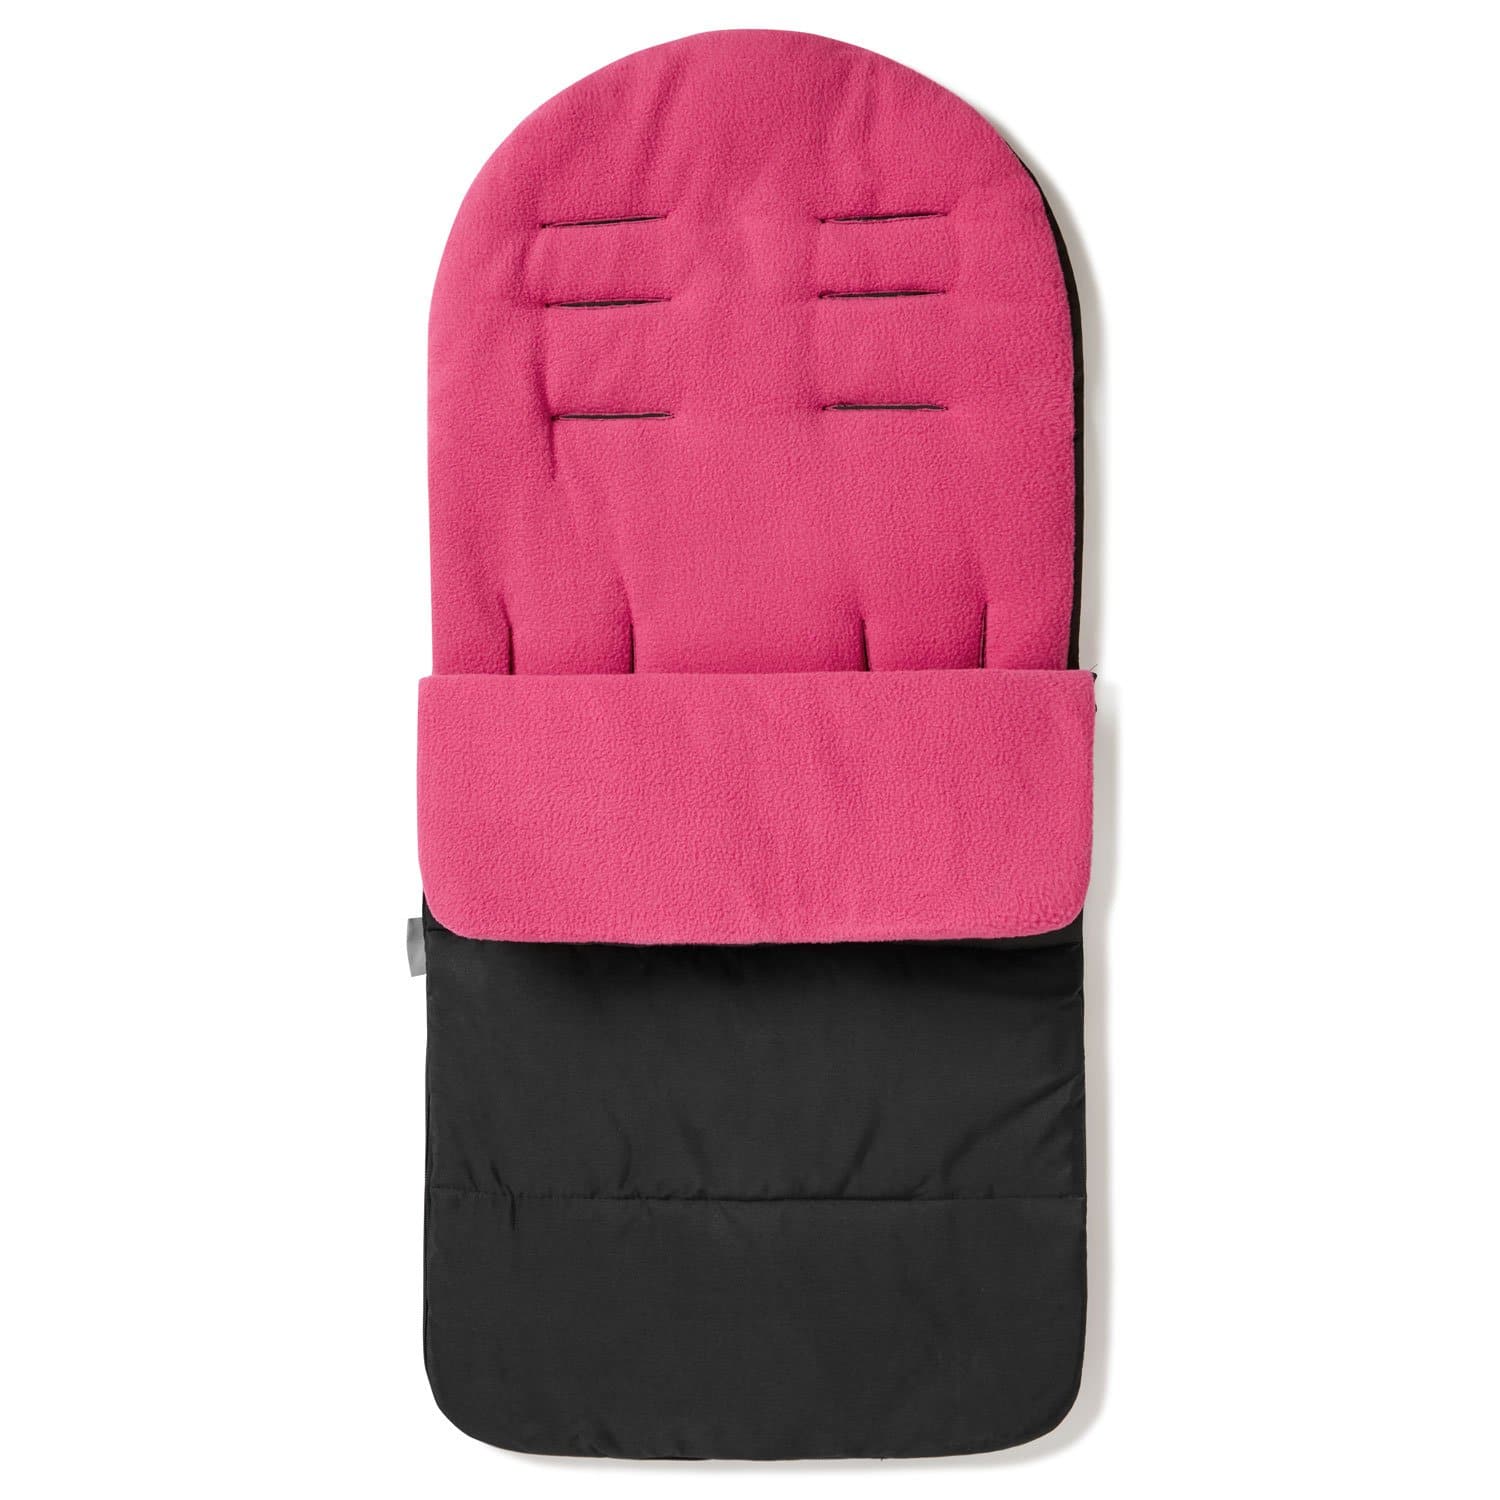 Premium Footmuff / Cosy Toes Compatible with Venicci - Pink Rose / Fits All Models | For Your Little One